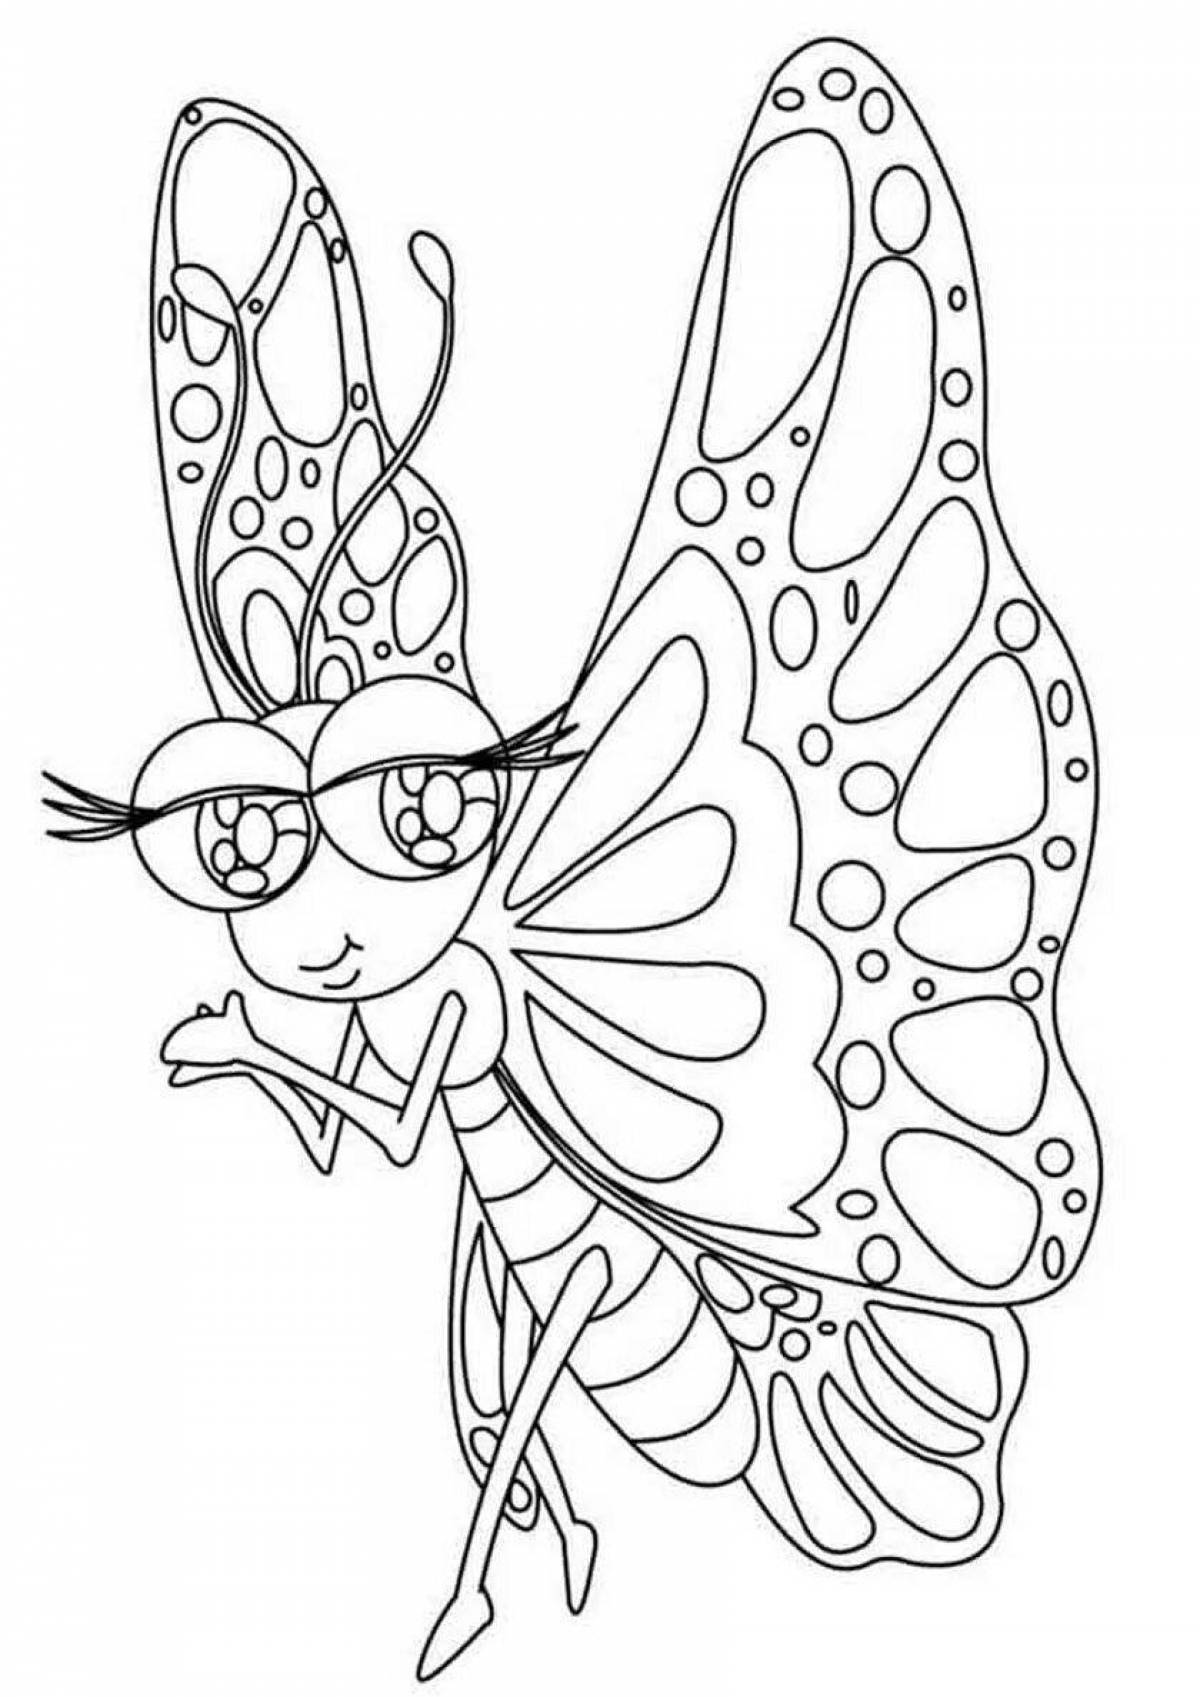 Awesome butterfly coloring page